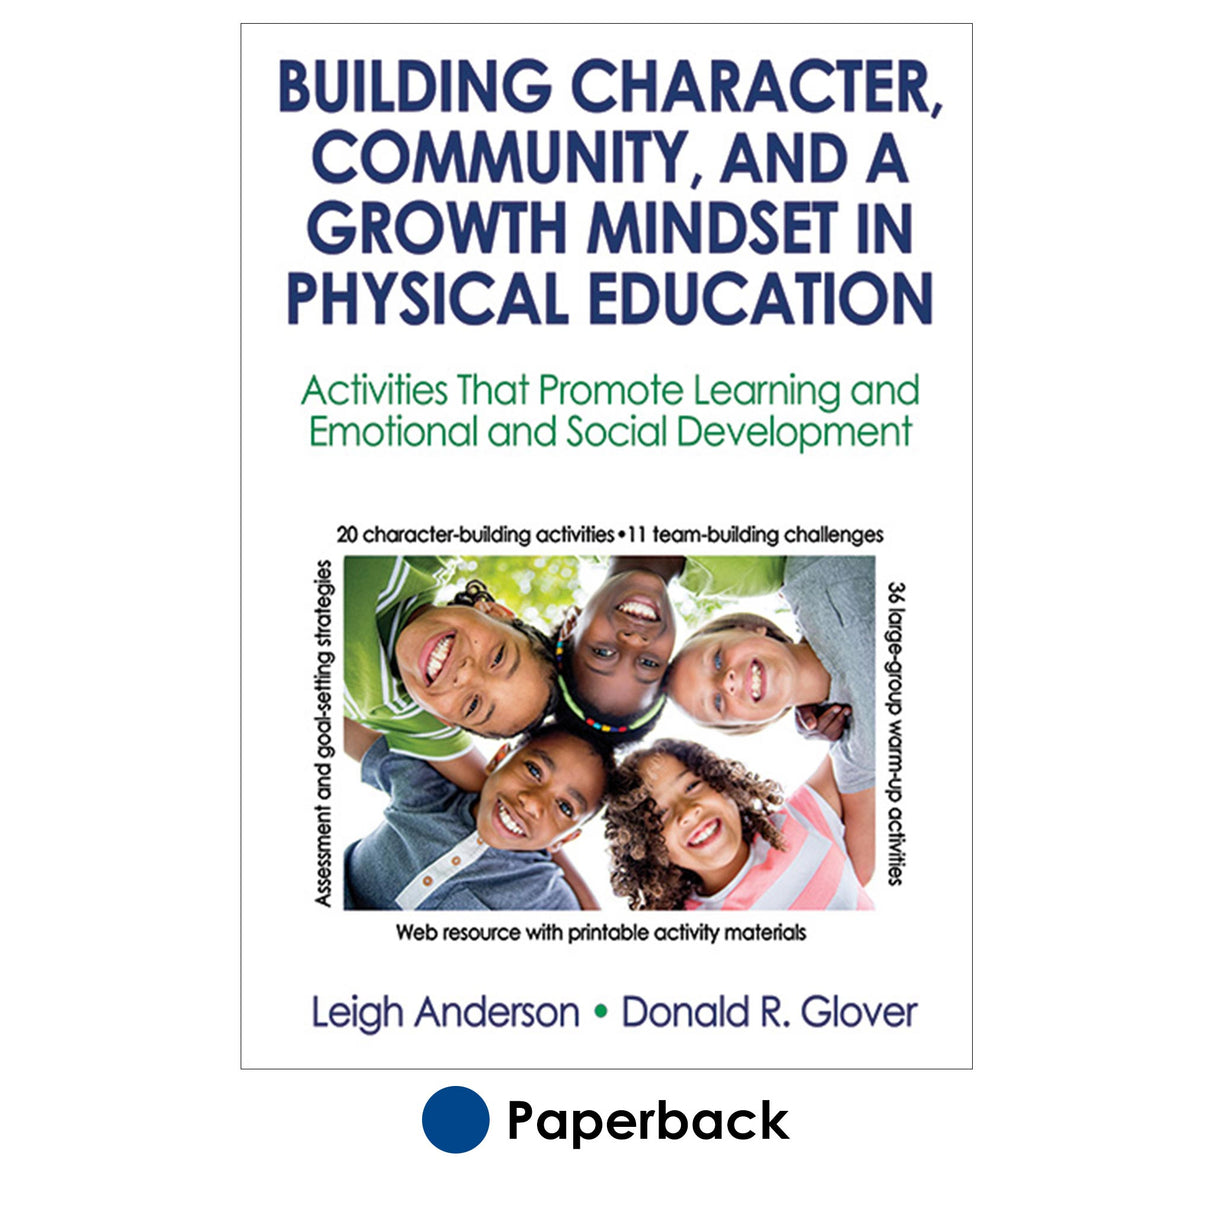 Building Character, Community, and a Growth Mindset in Physical Education With Web Resource